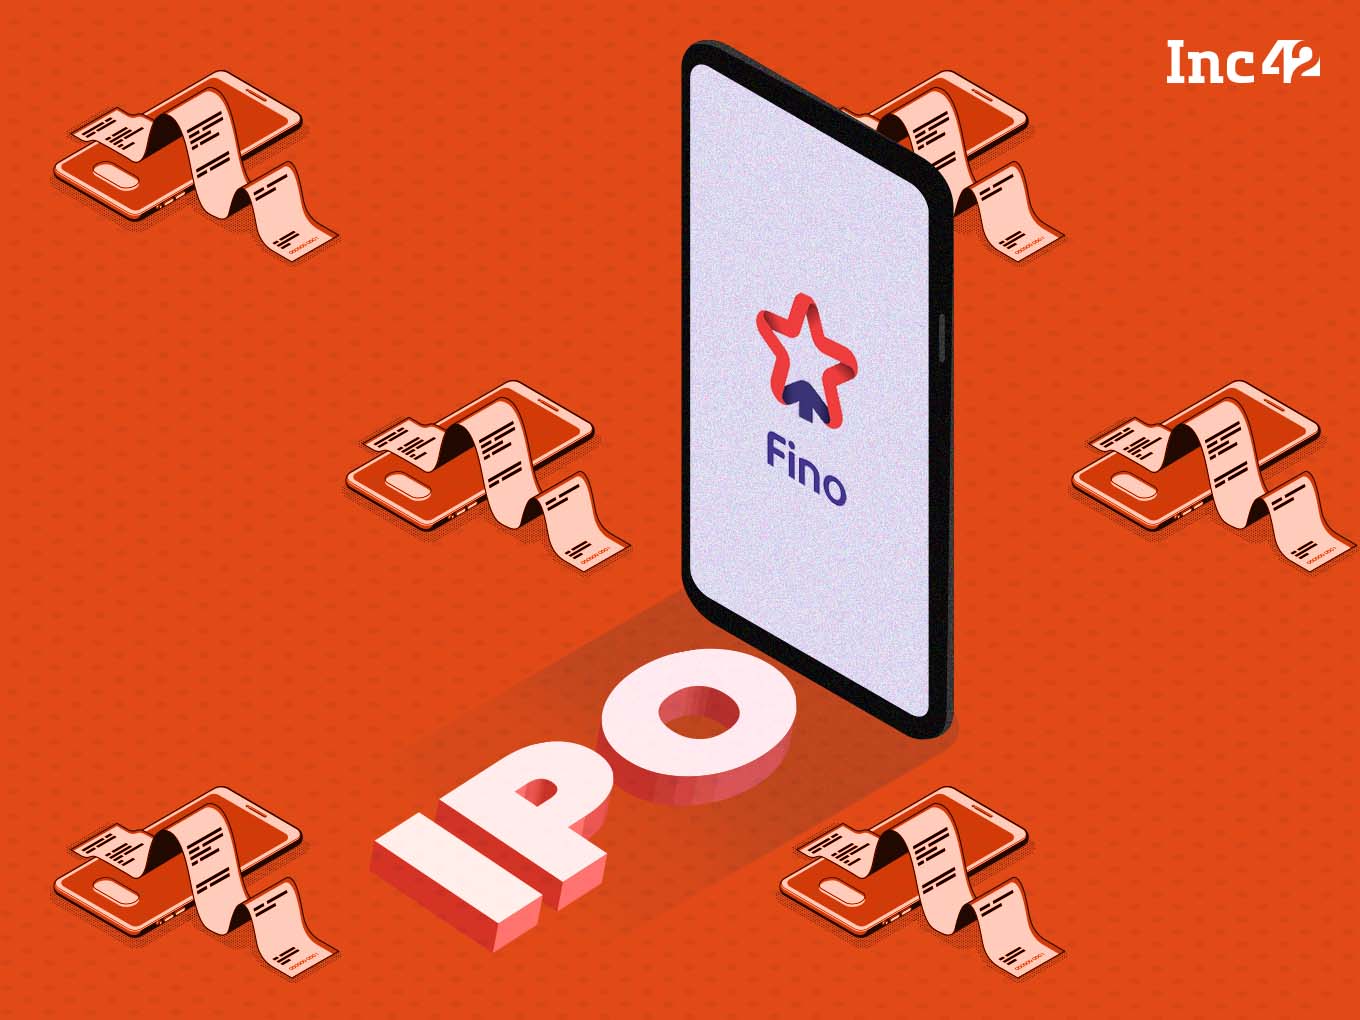 Fino Payments Bank Raises INR 538.78 Cr From Anchor Investors